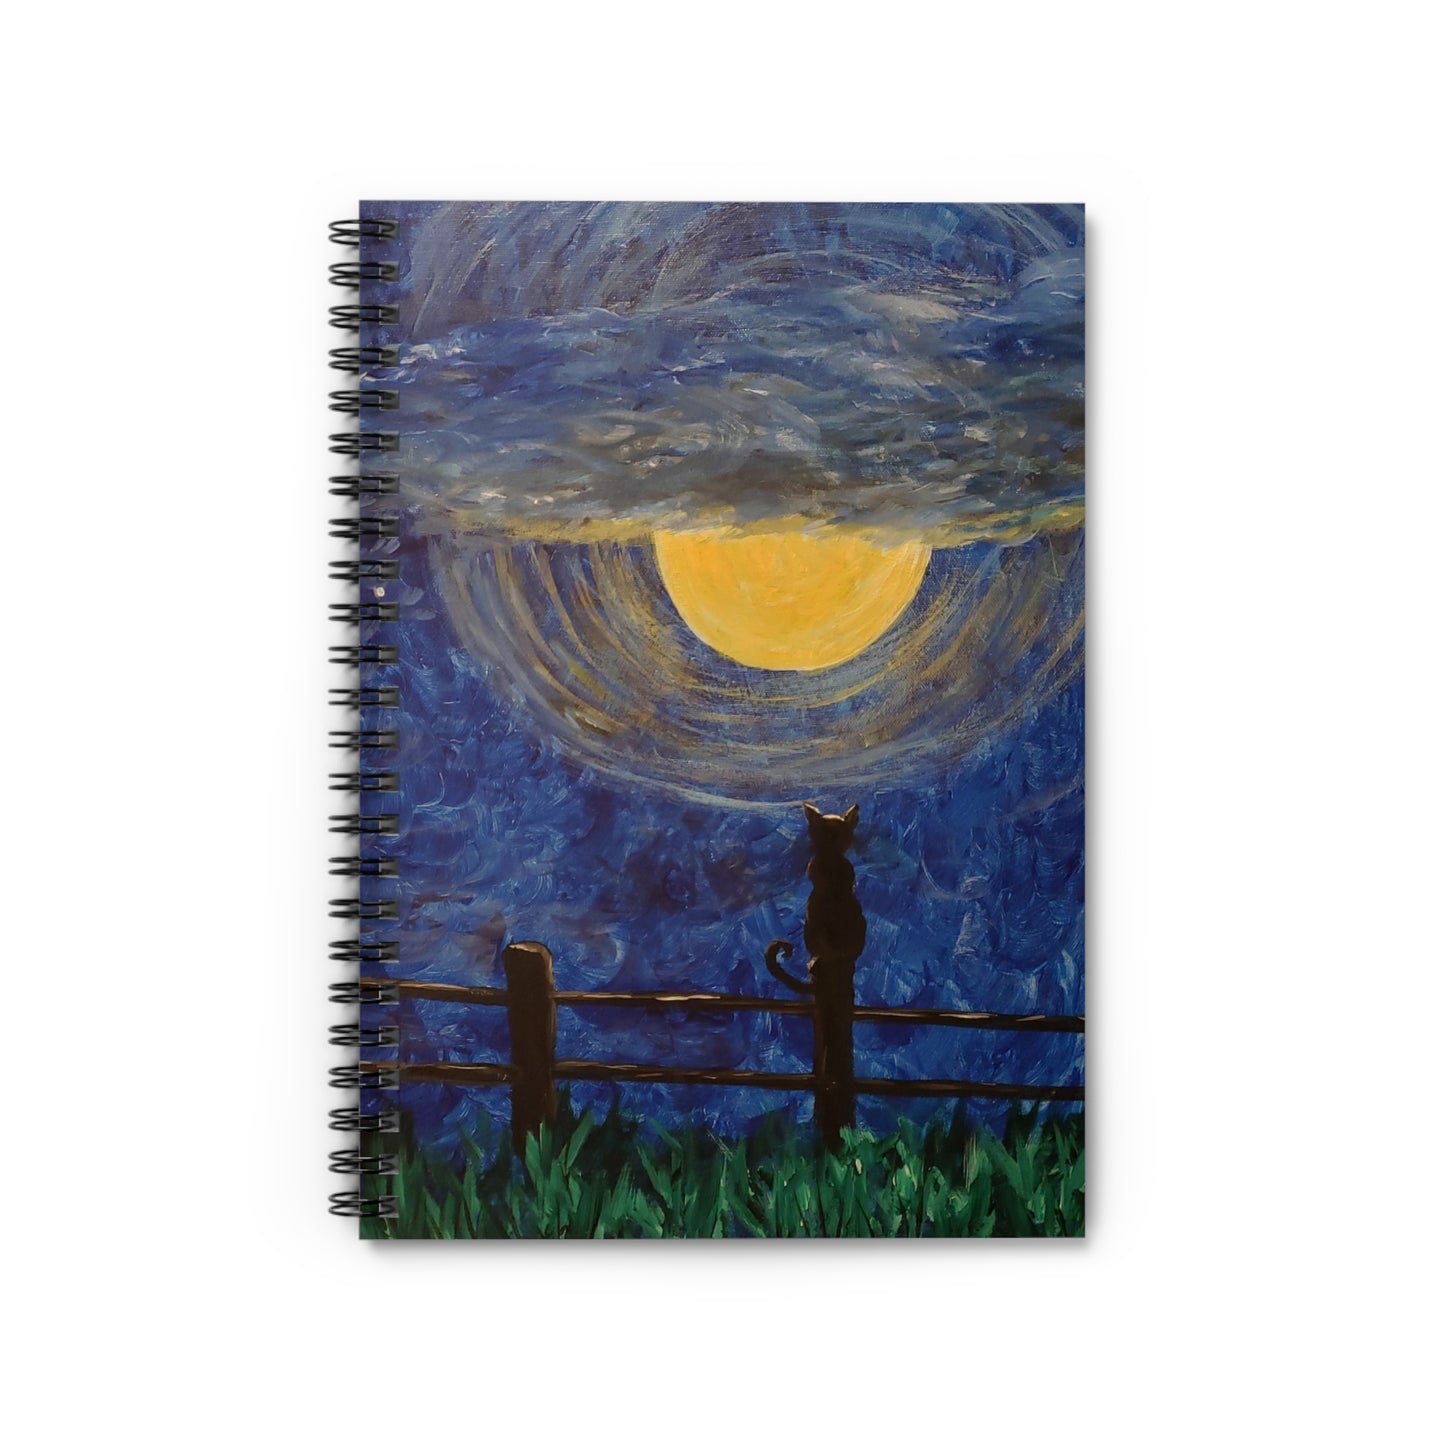 Moon Shadow Spiral Notebook - Ruled Line